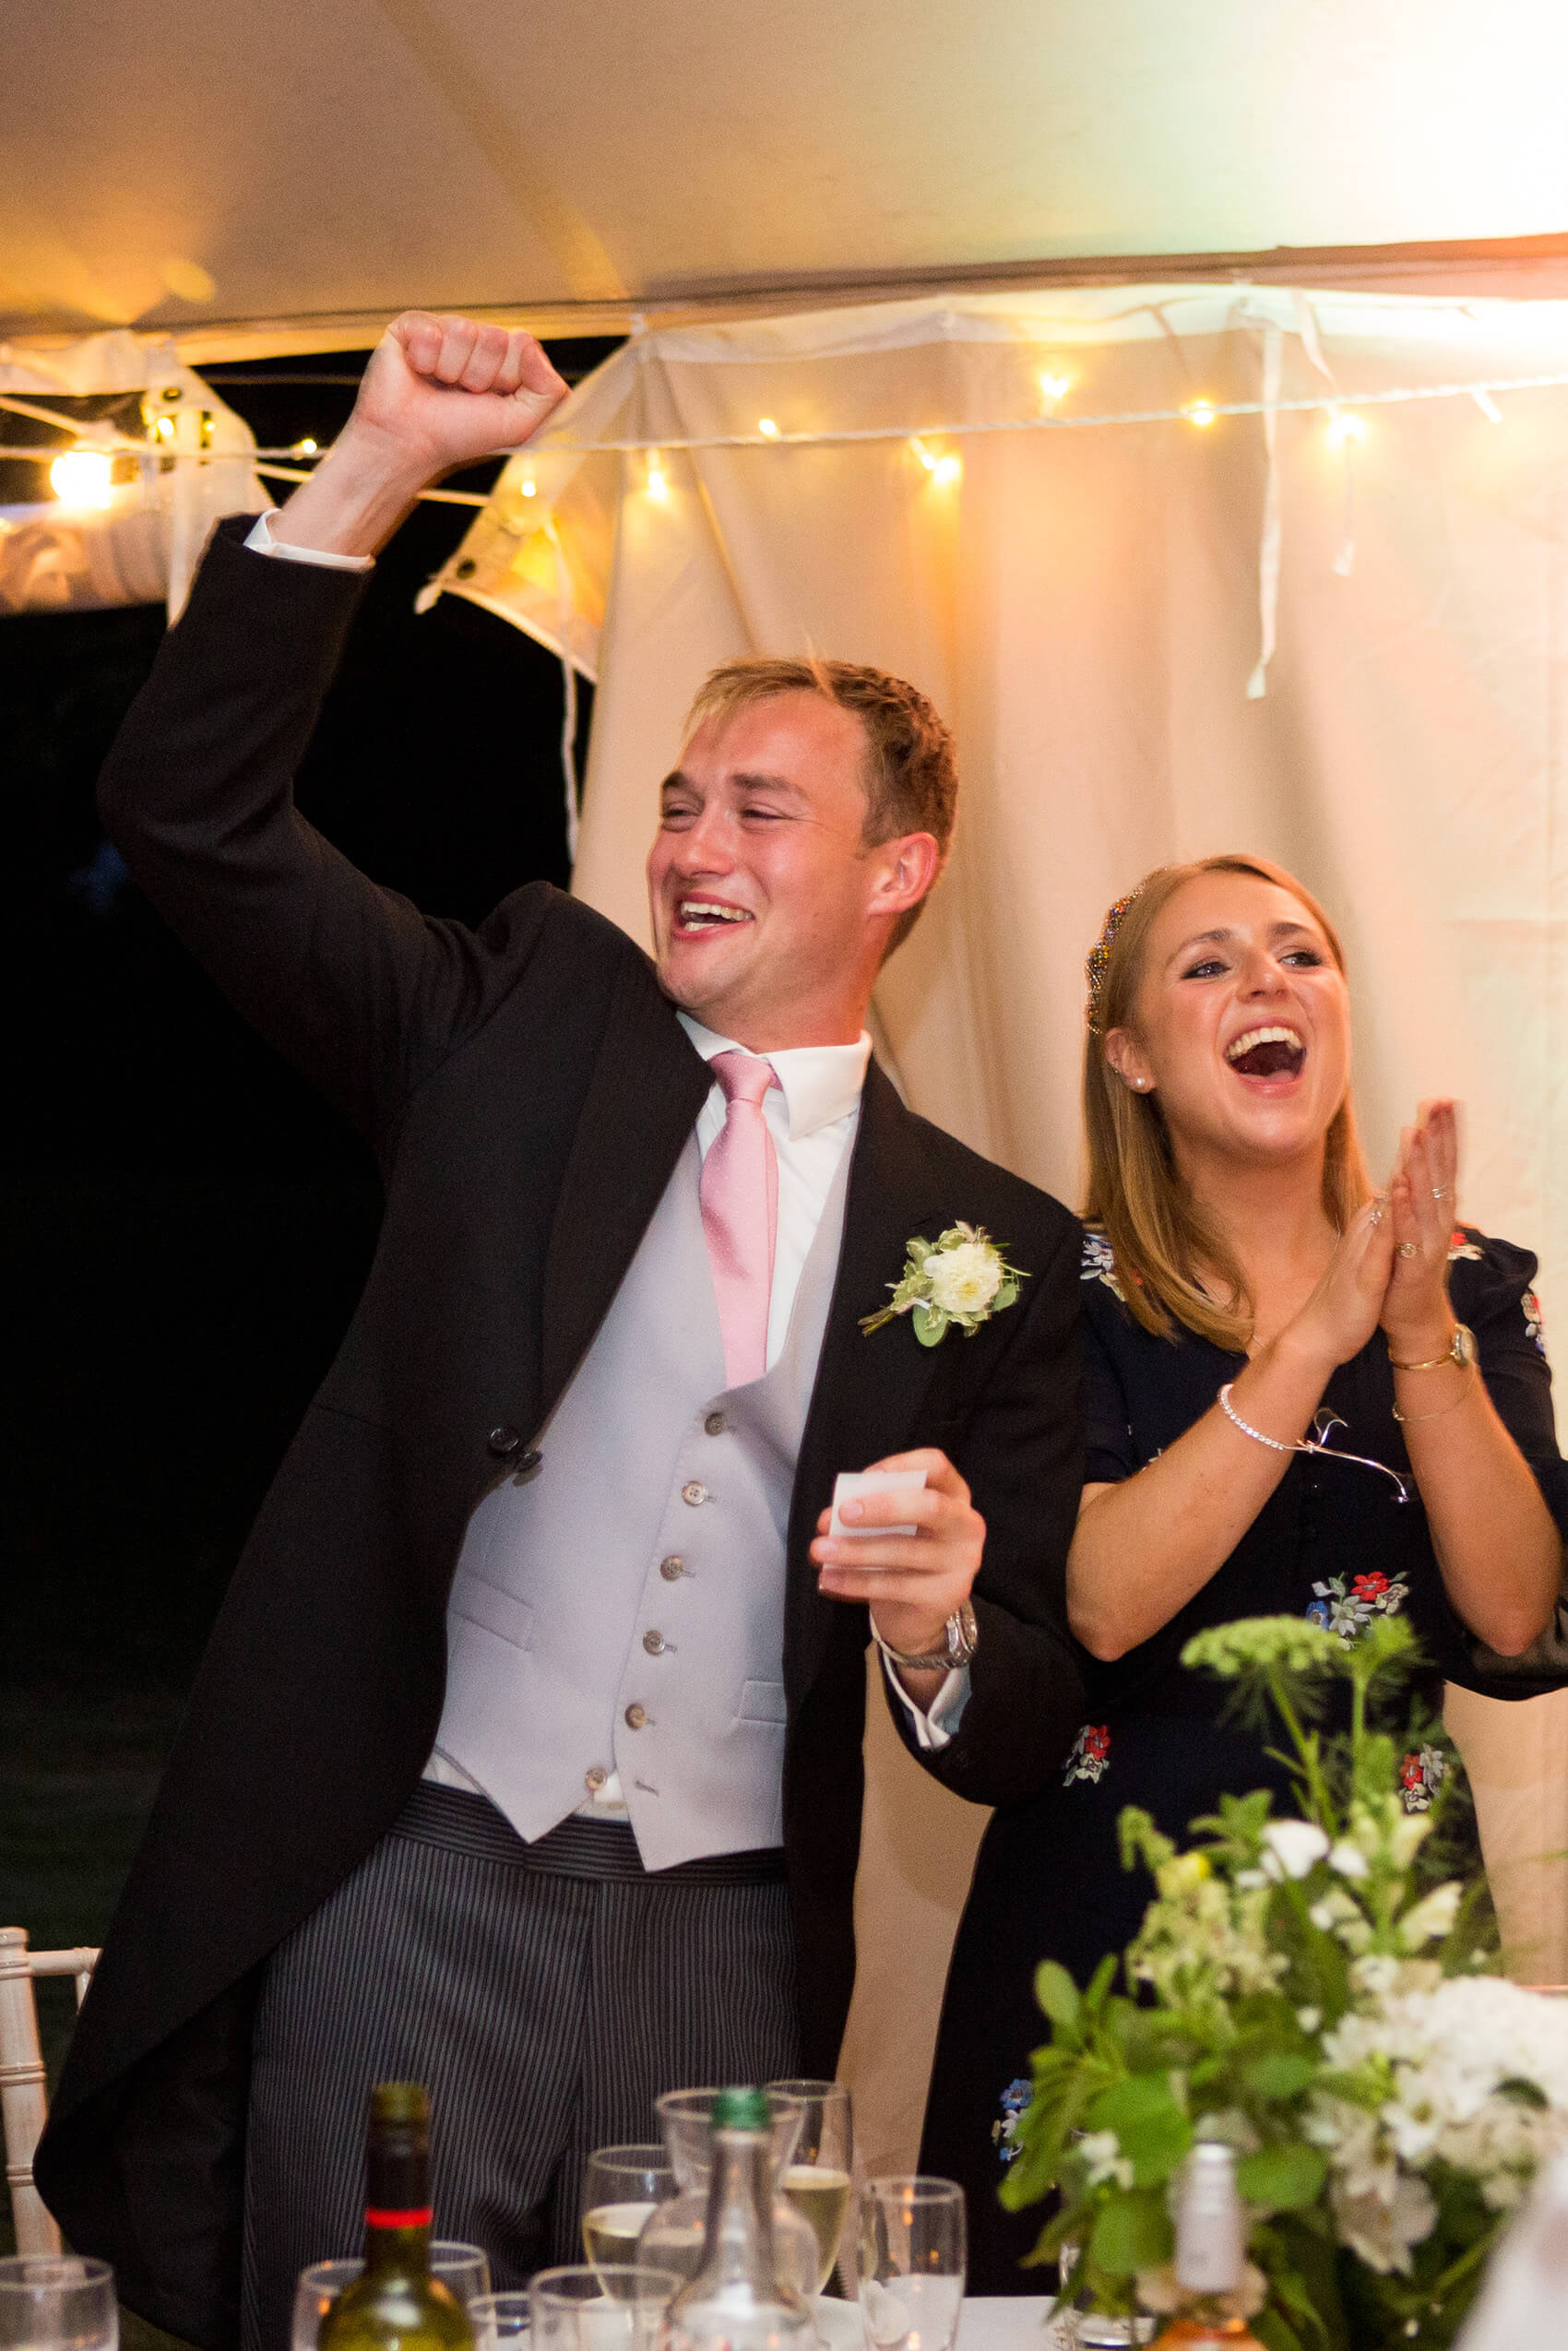 Man and woman dancing and laughing at a wedding